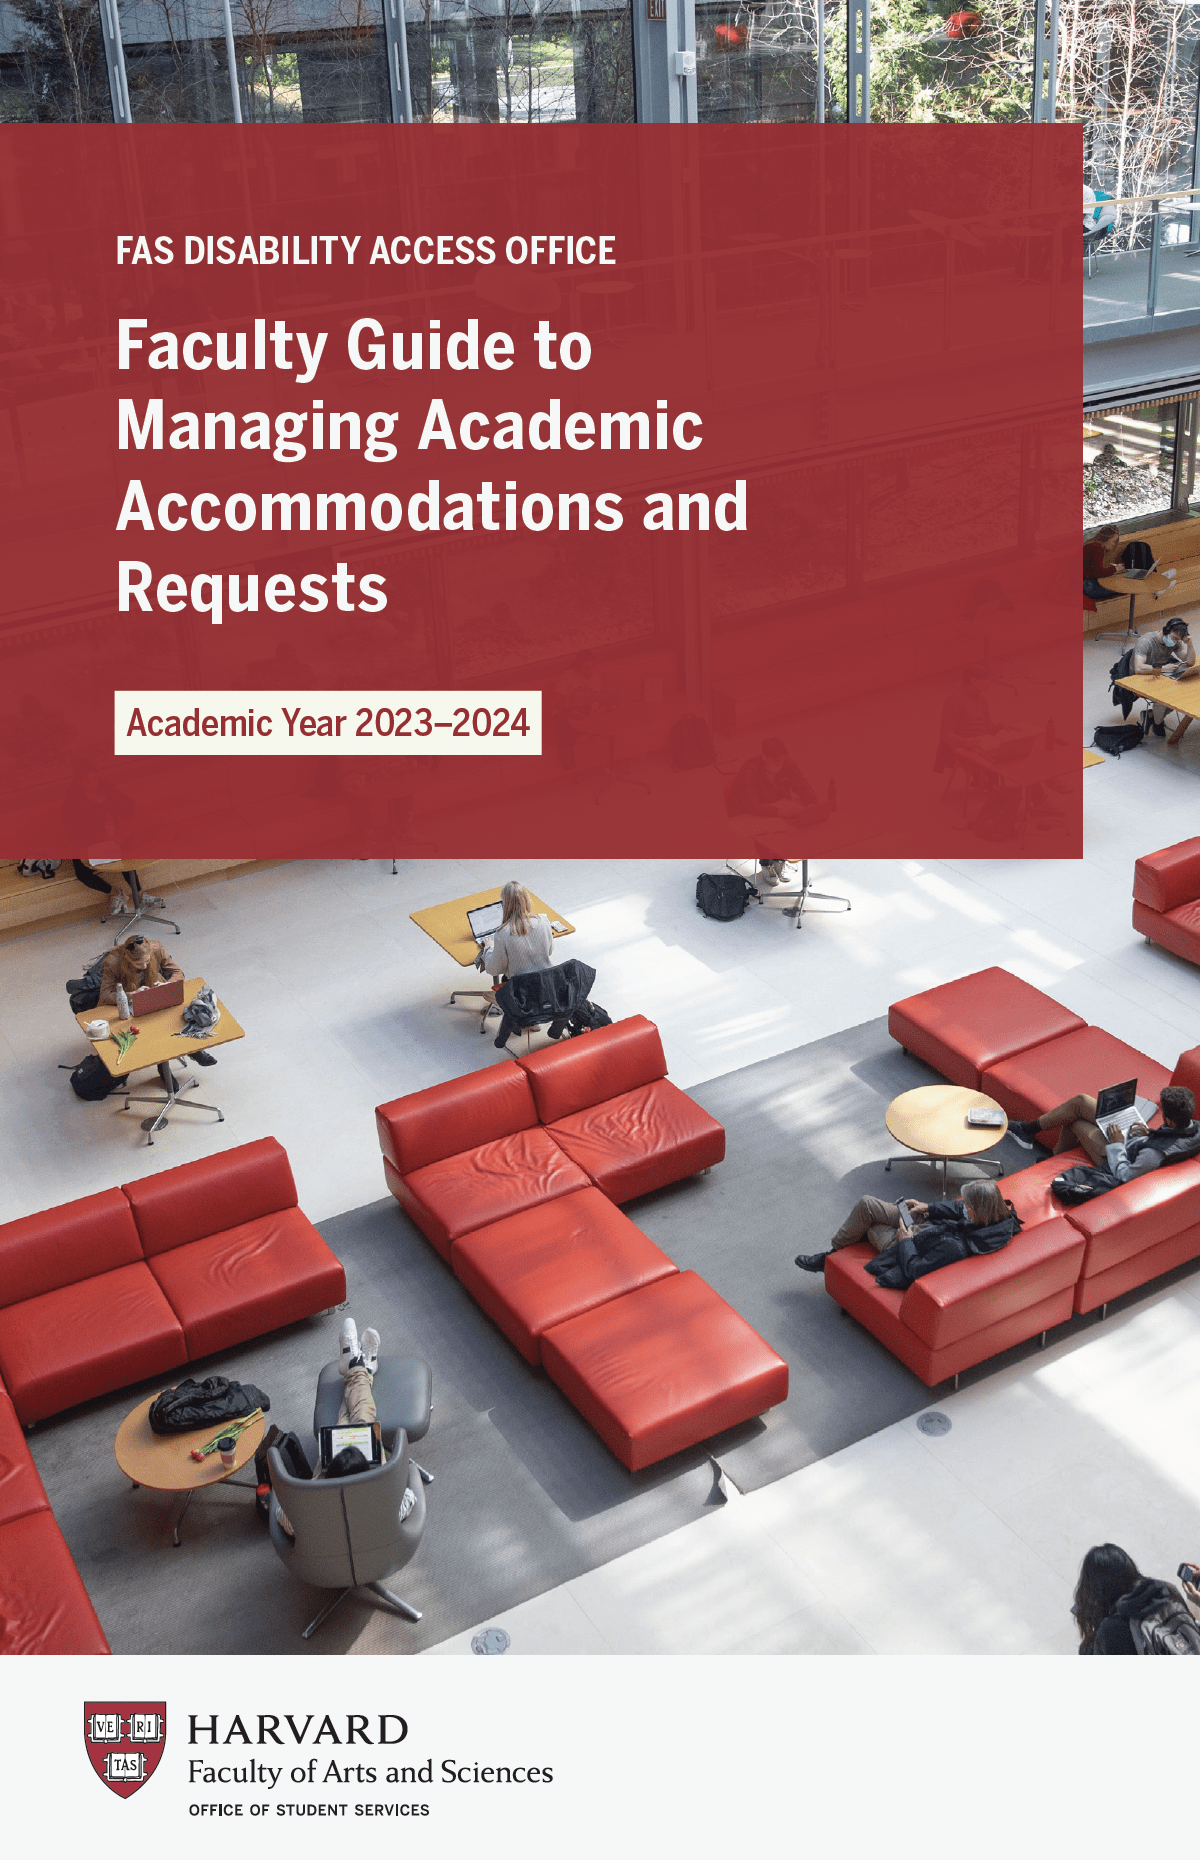 FAS Disability Access Office | Faculty Guide to Accommodations and Requests | Academic Year 2023-2024 | Harvard Faculty of Arts and Sciences Office of Student Services